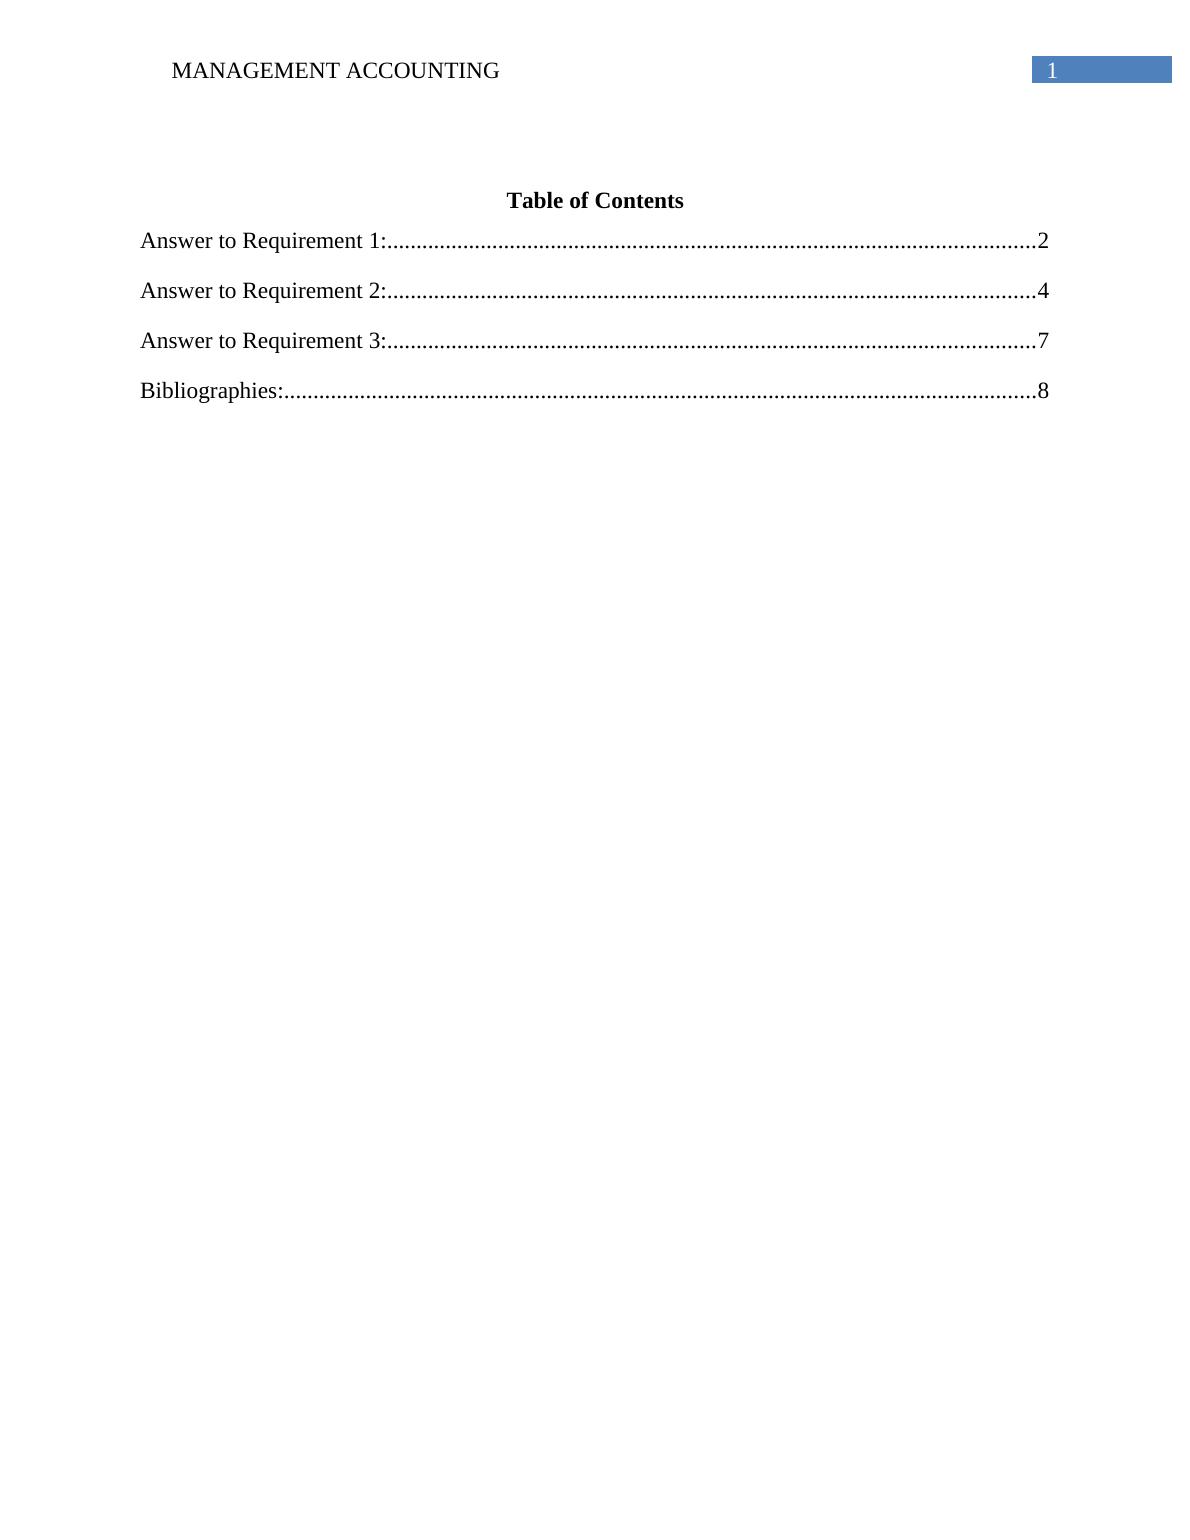 Management Accounting  -  Solved Assignment_2